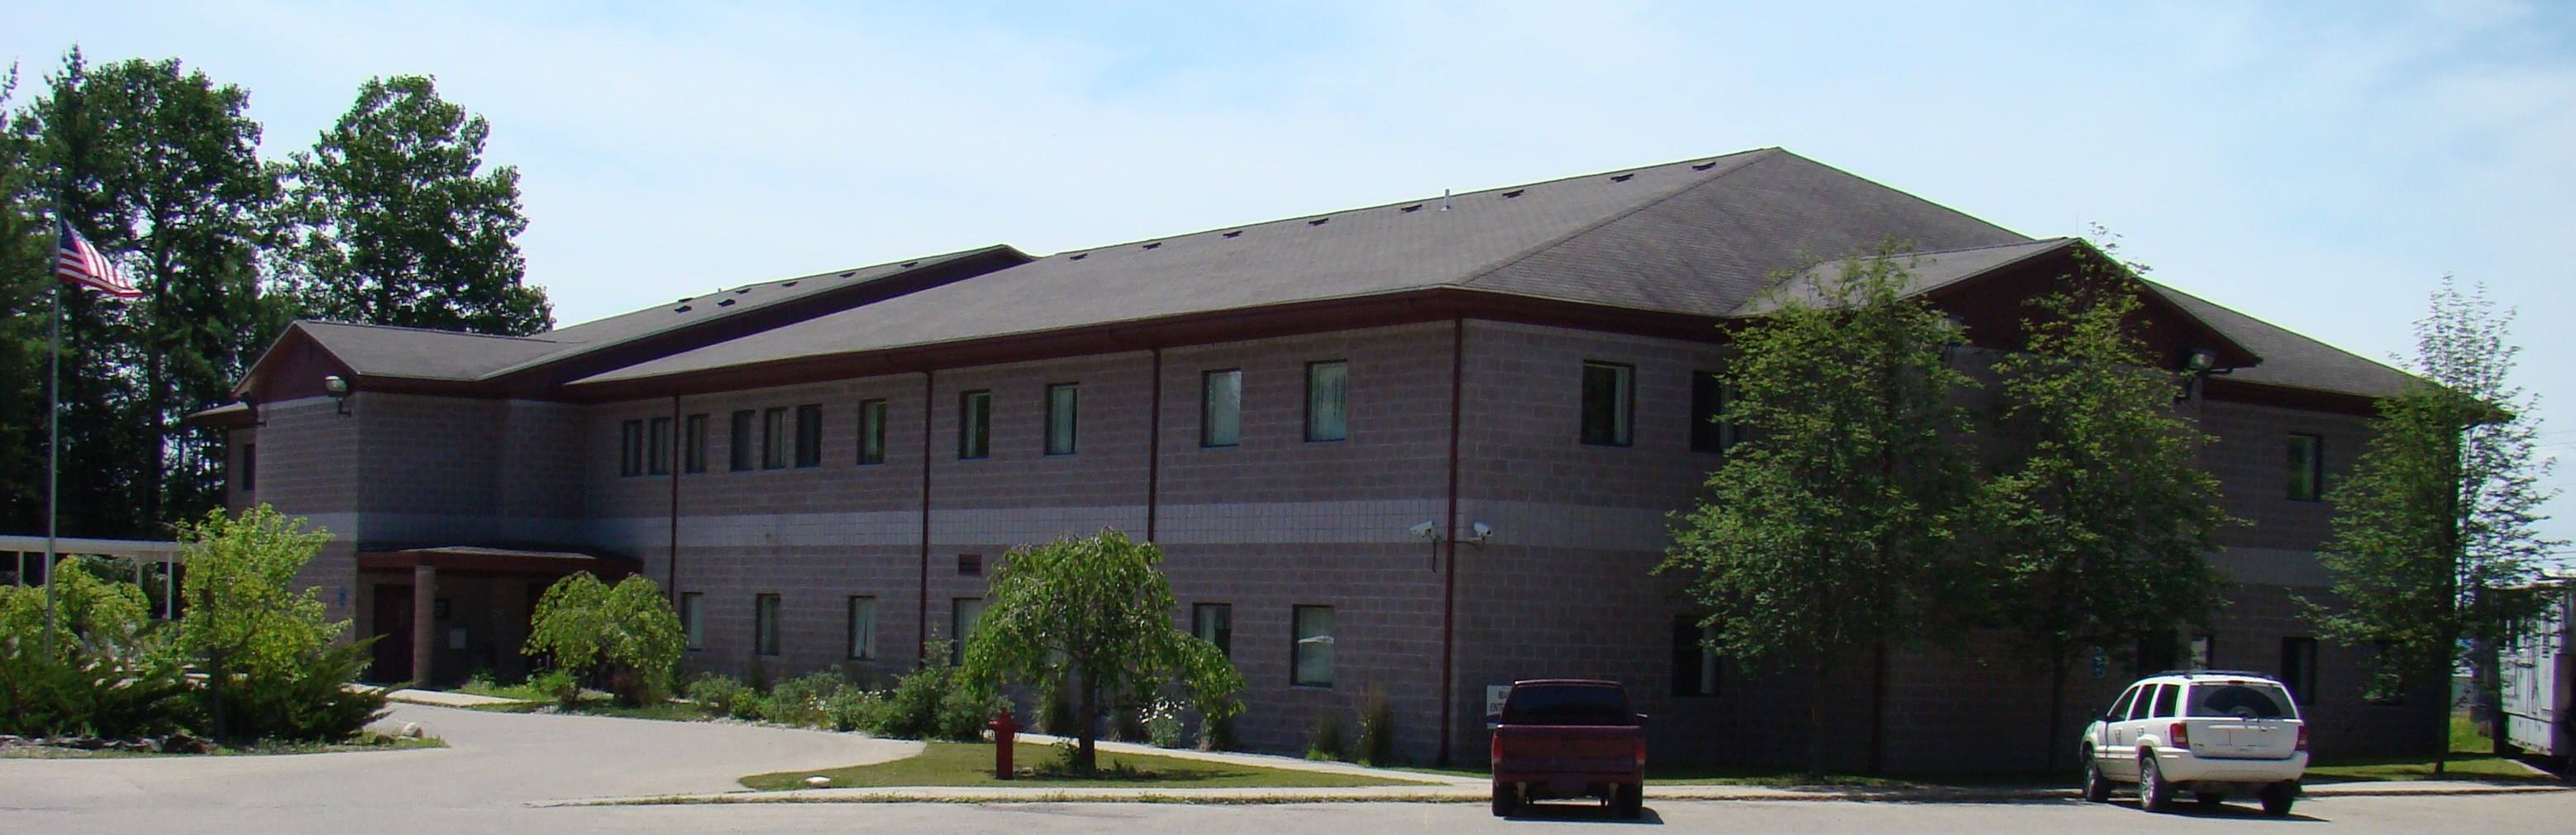 District Health Department 4 Branch Office